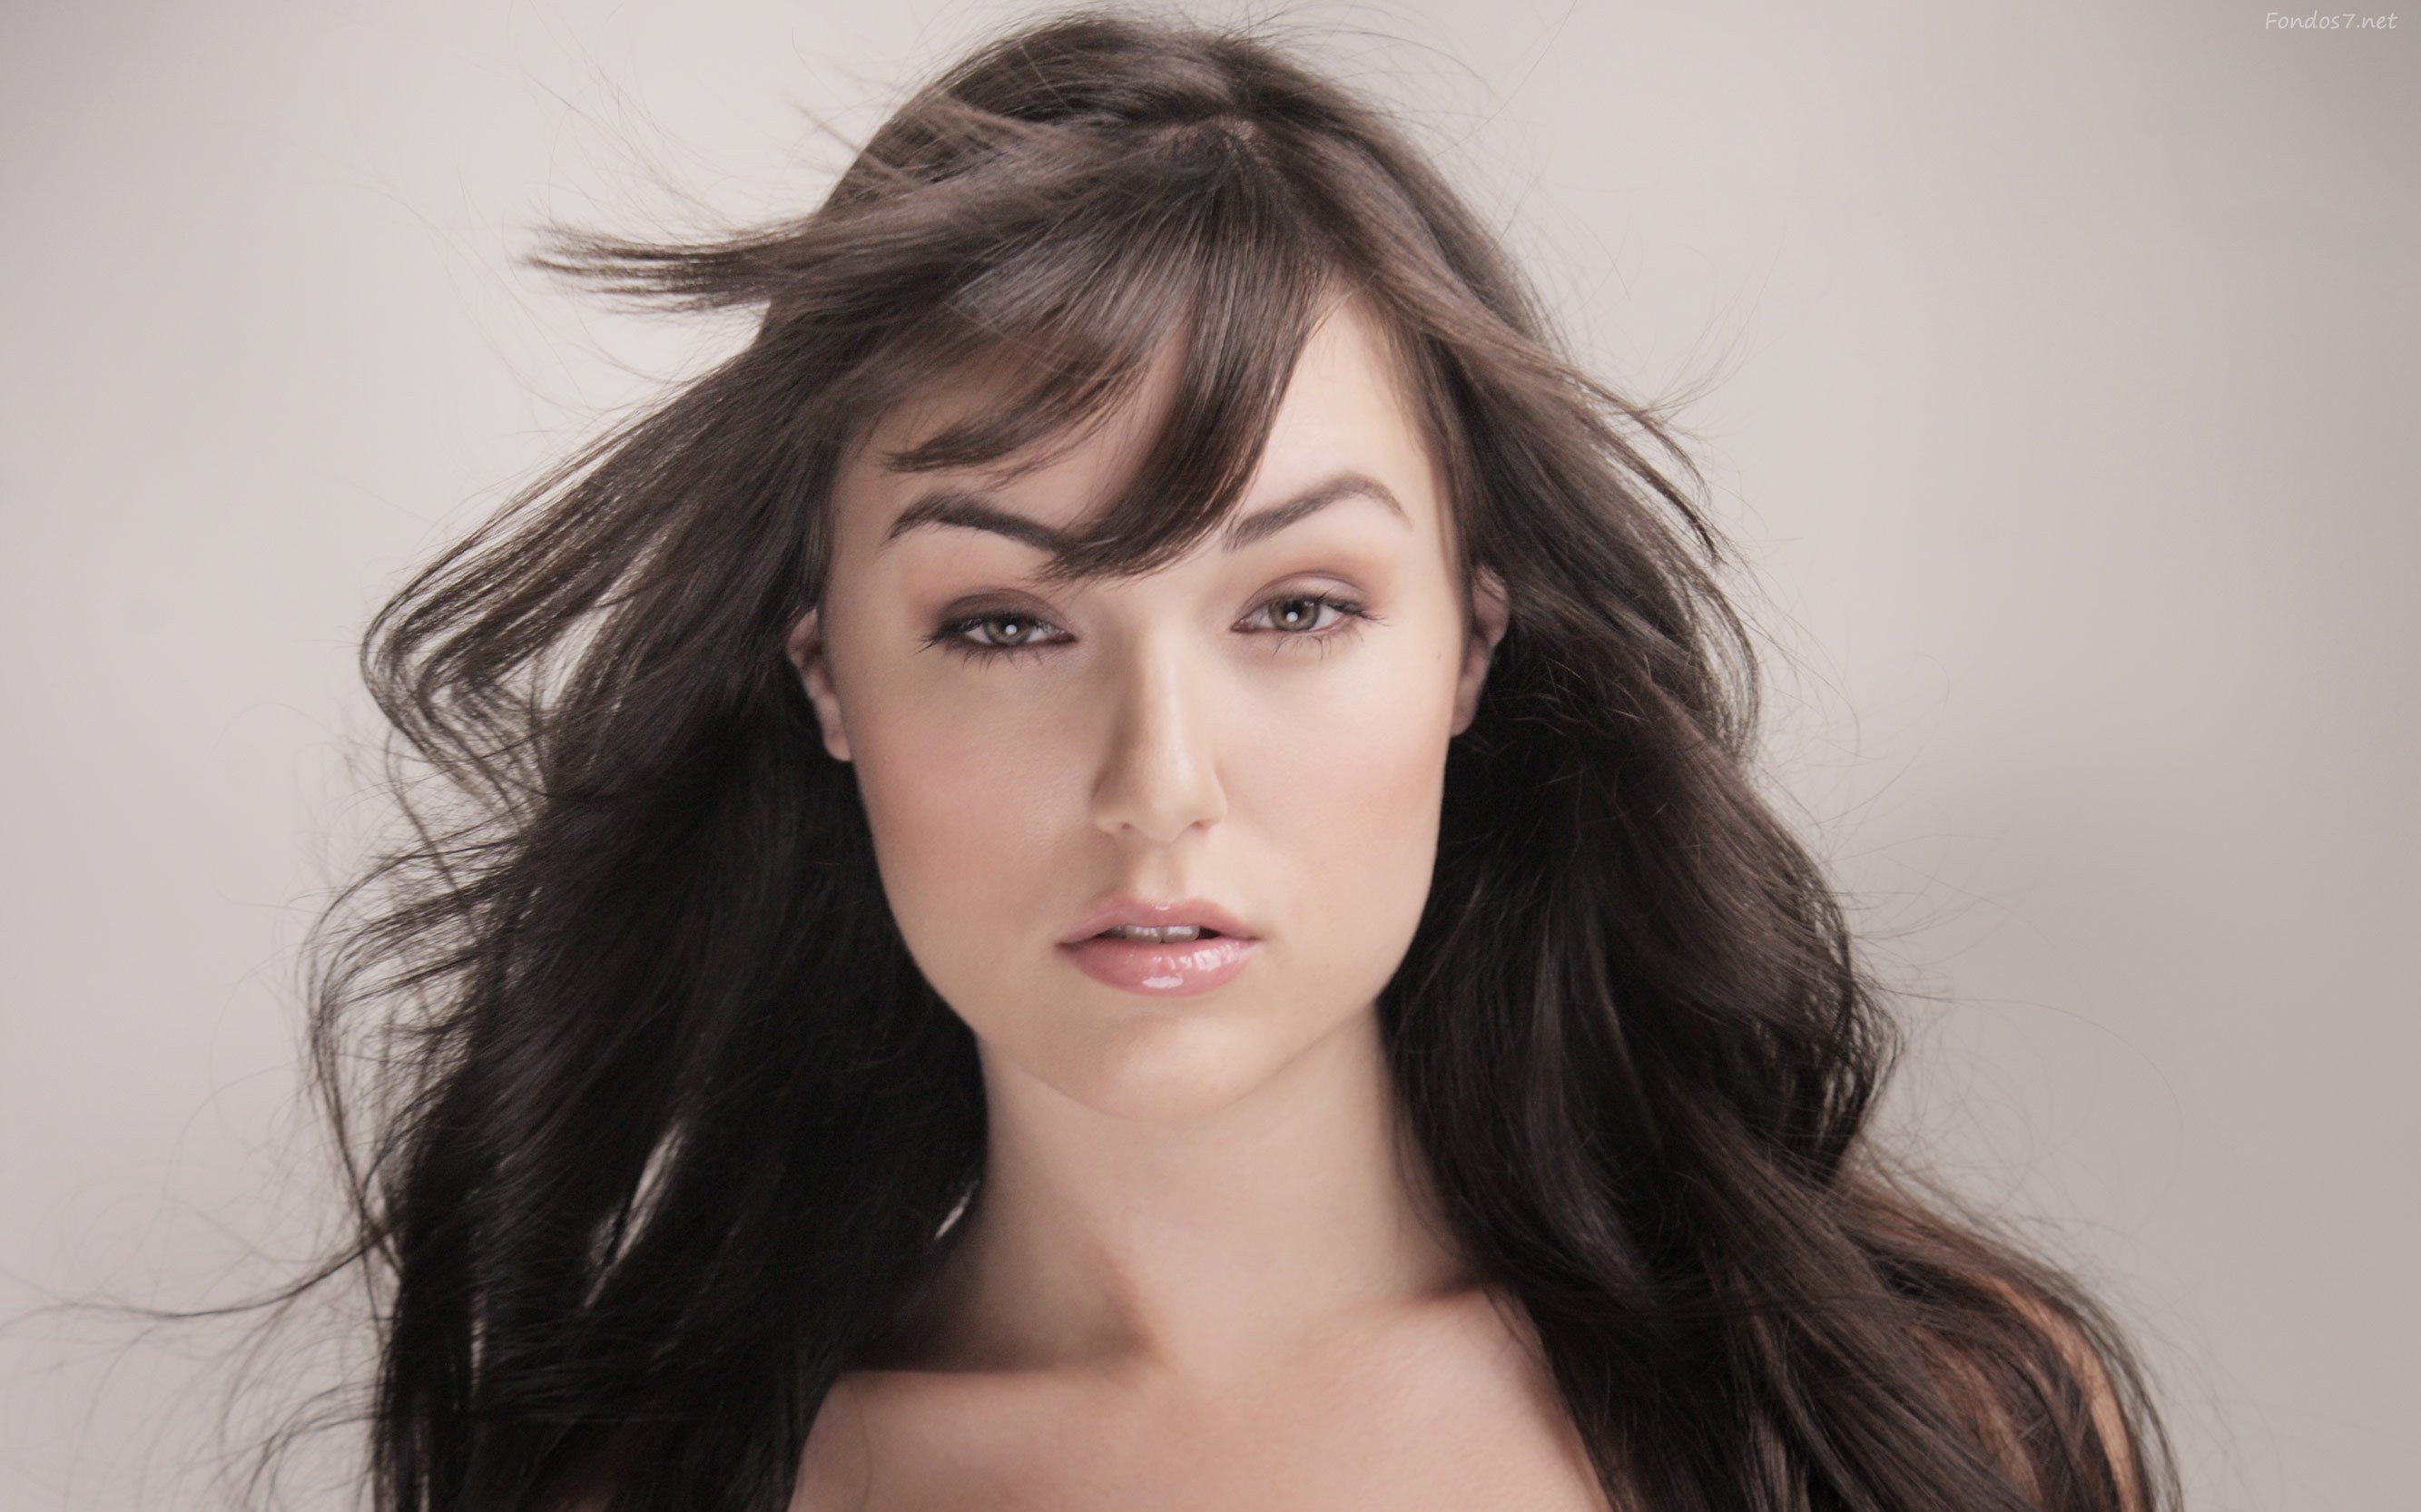 ITSTHESHIP The Stripped Down Sasha Grey Interview She Needs No Fancy